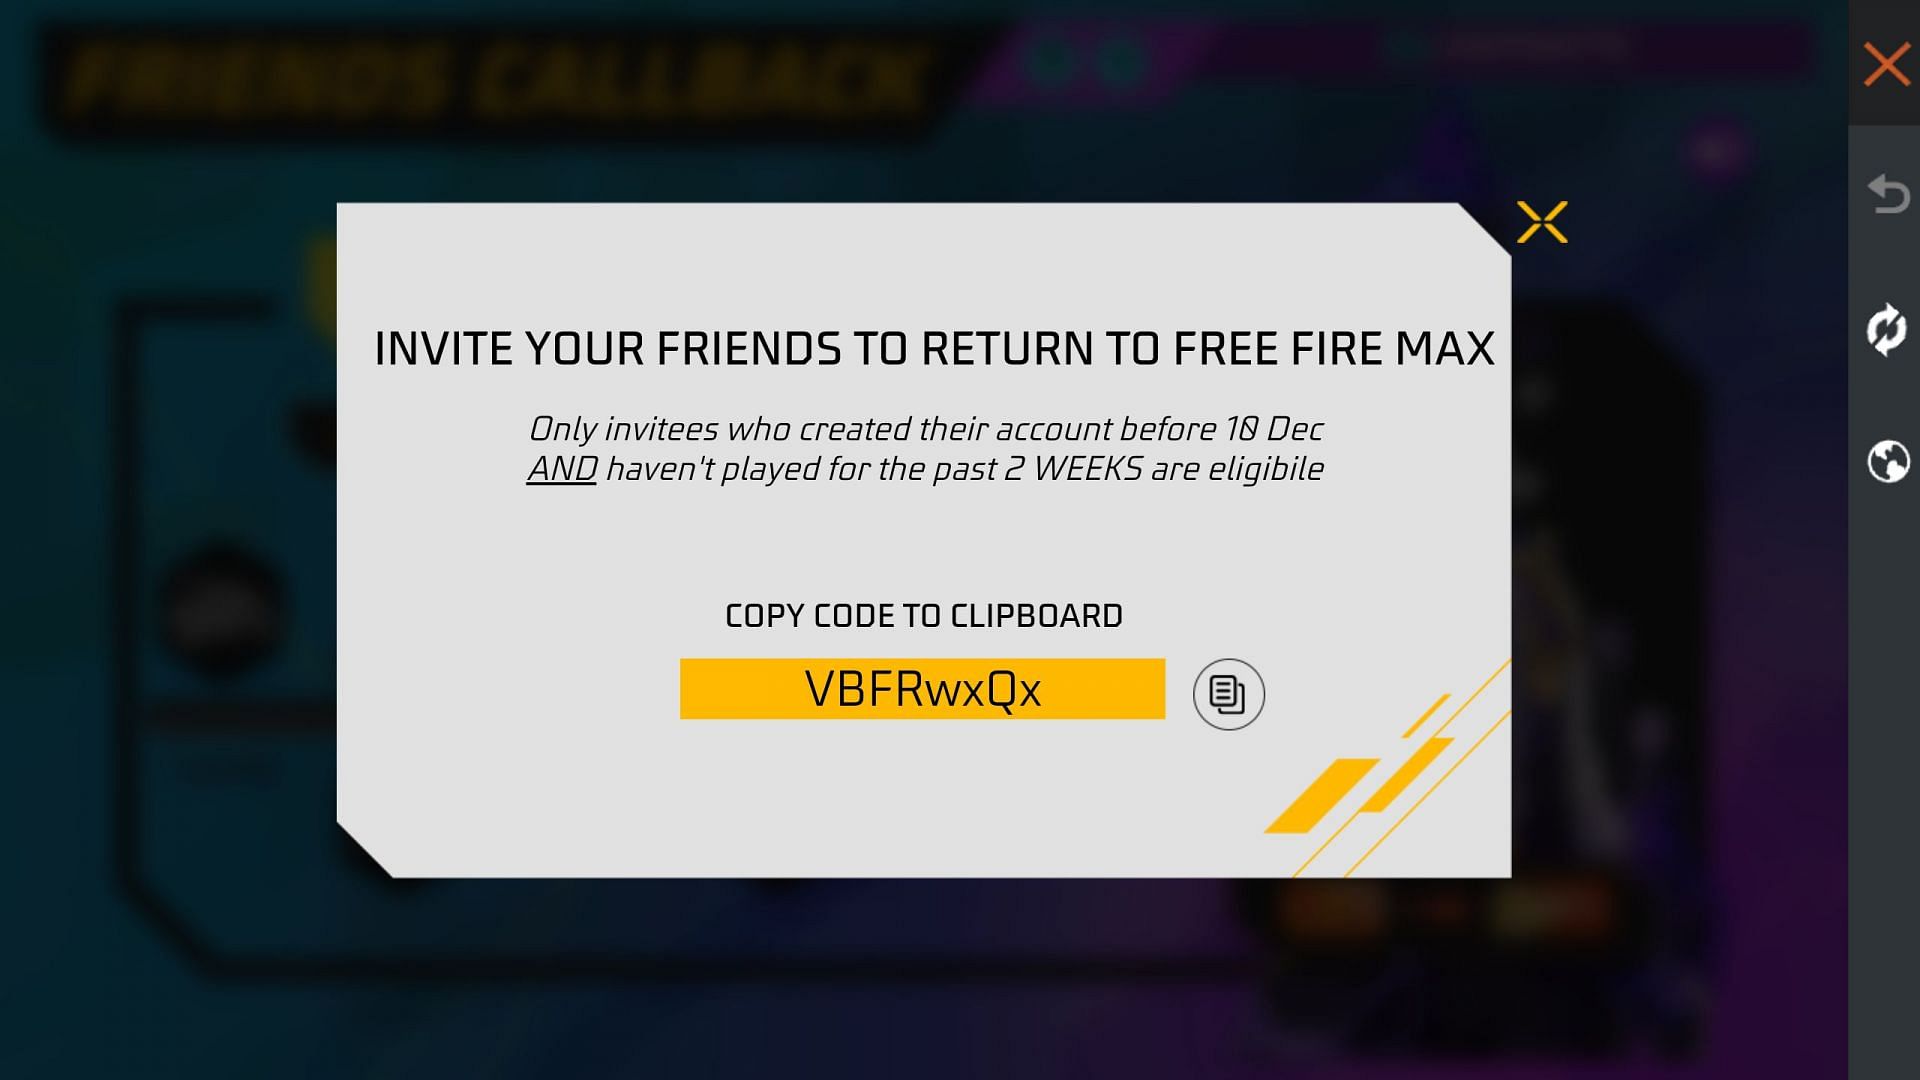 Provide this code to your friends and ask them to use it (Image via Garena)